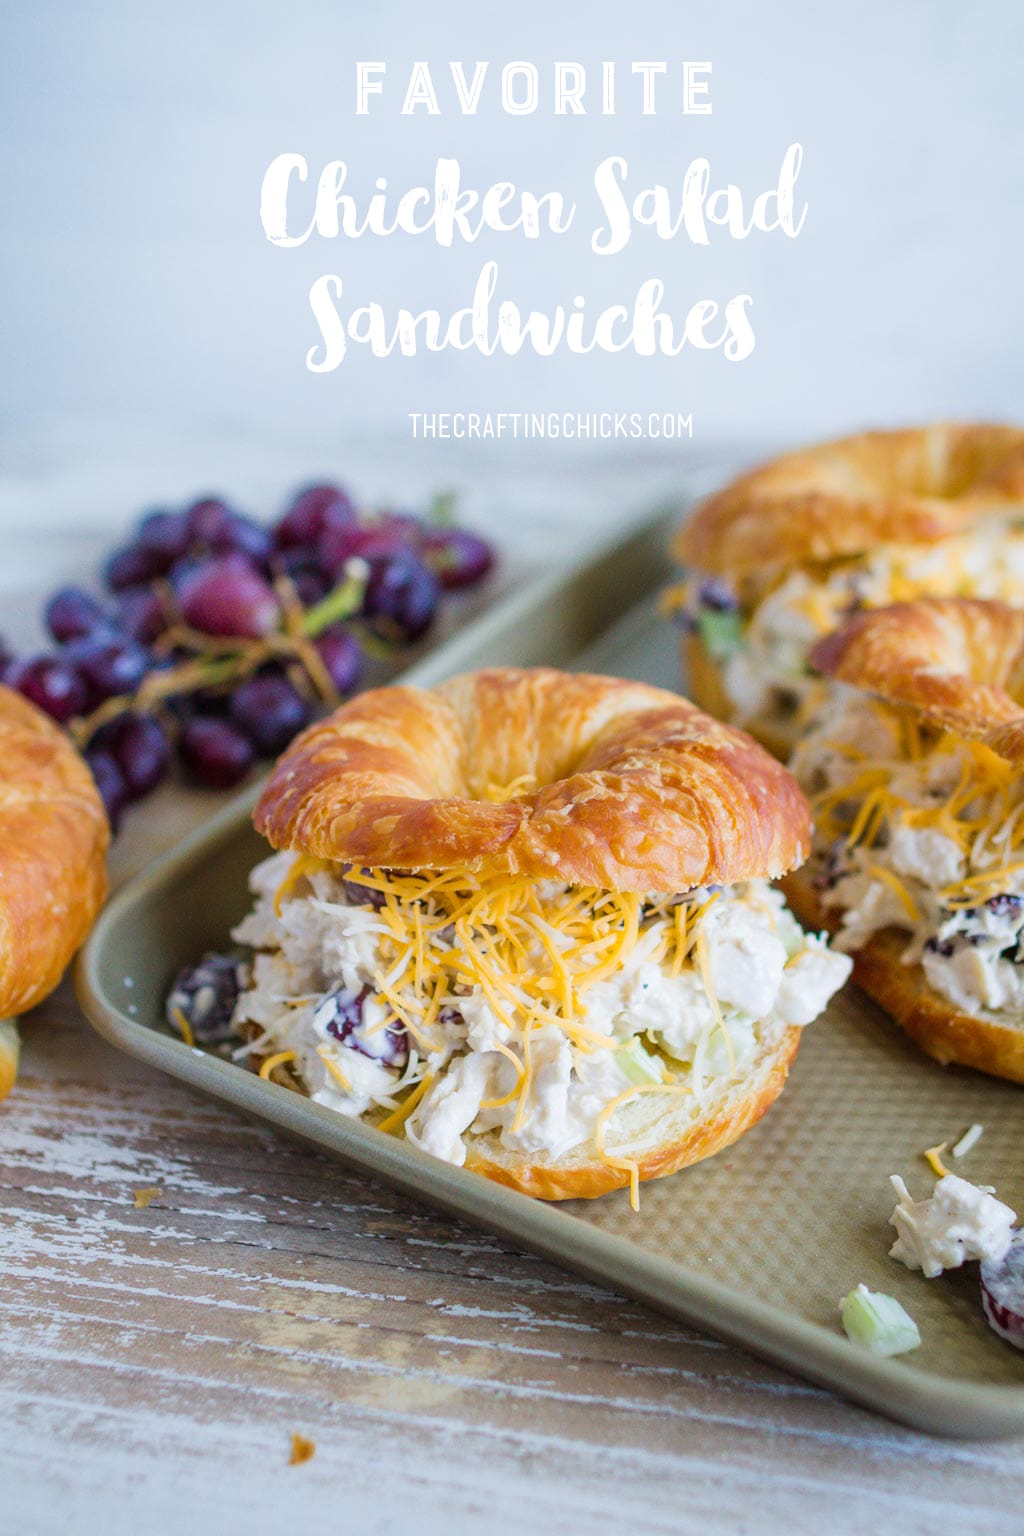 Favorite Chicken Salad Sandwiches. This recipe will become a family favorite.